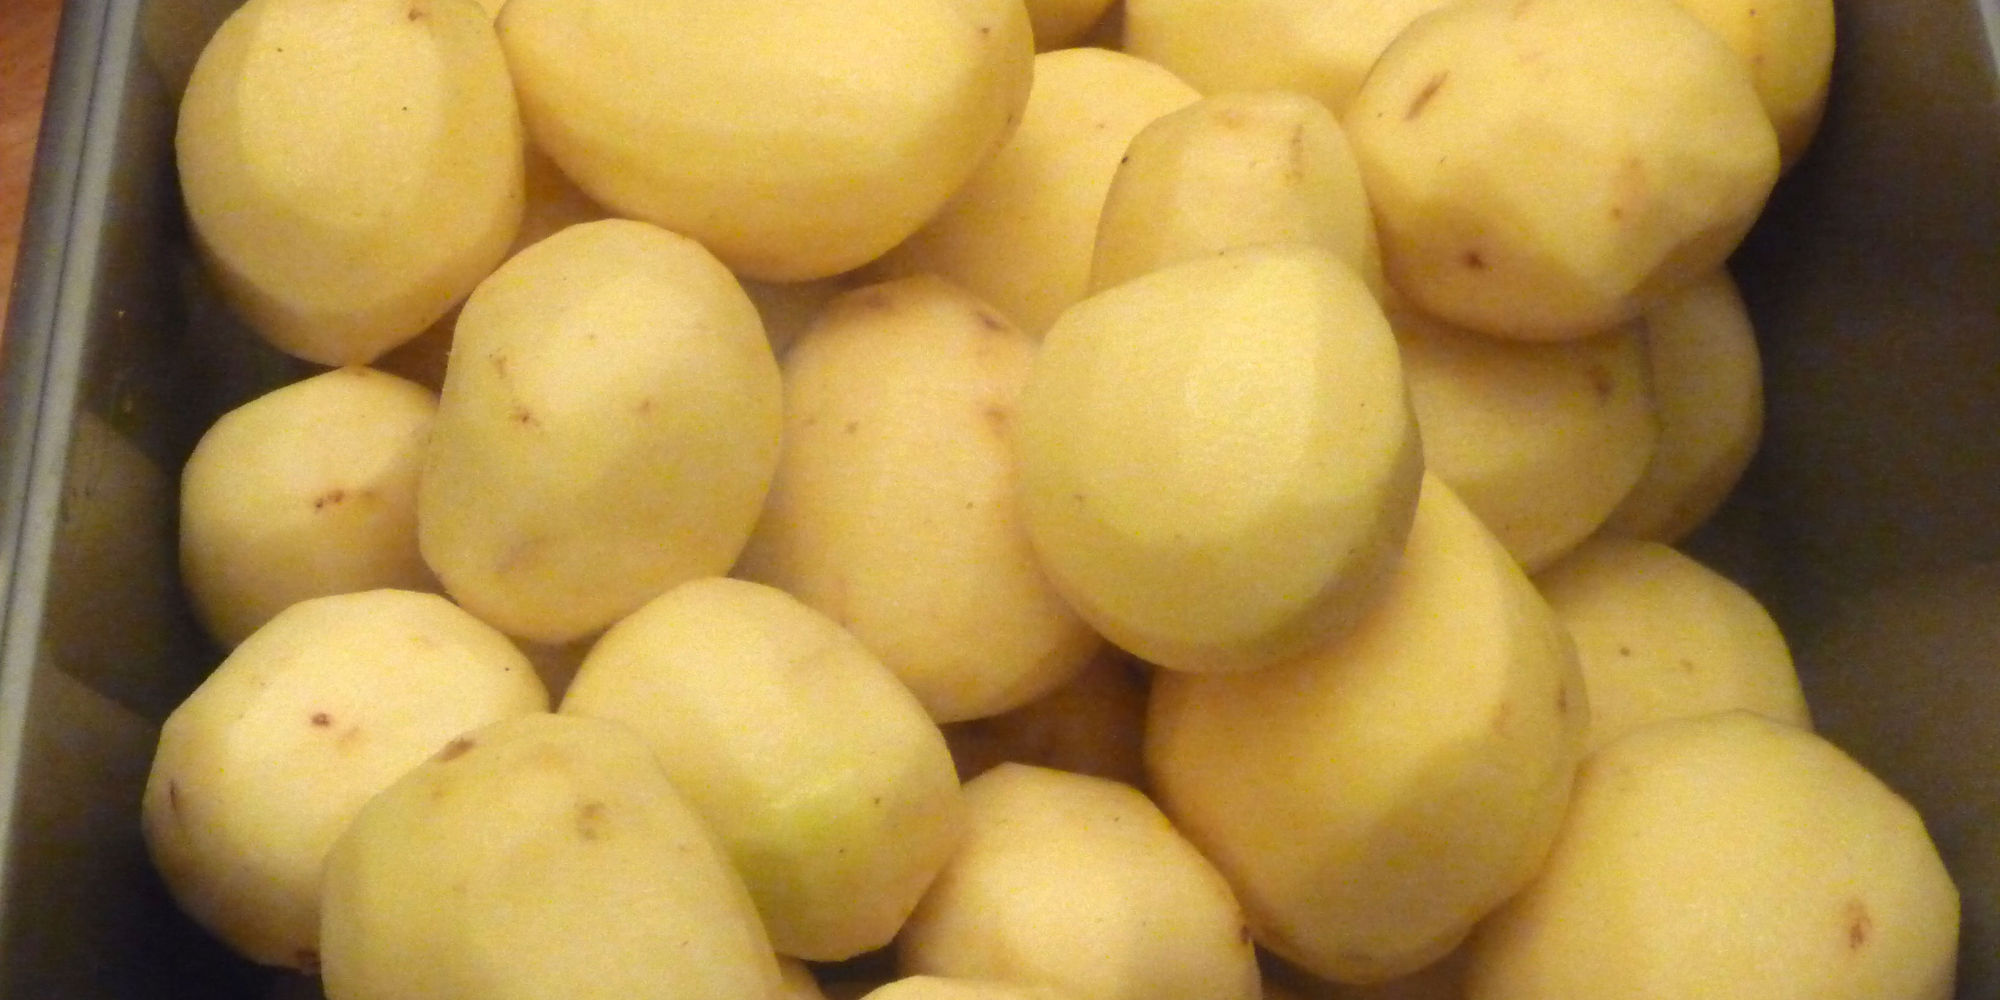 This Is How You Peel An Entire Bag Of Potatoes In Under 60 Seconds ...